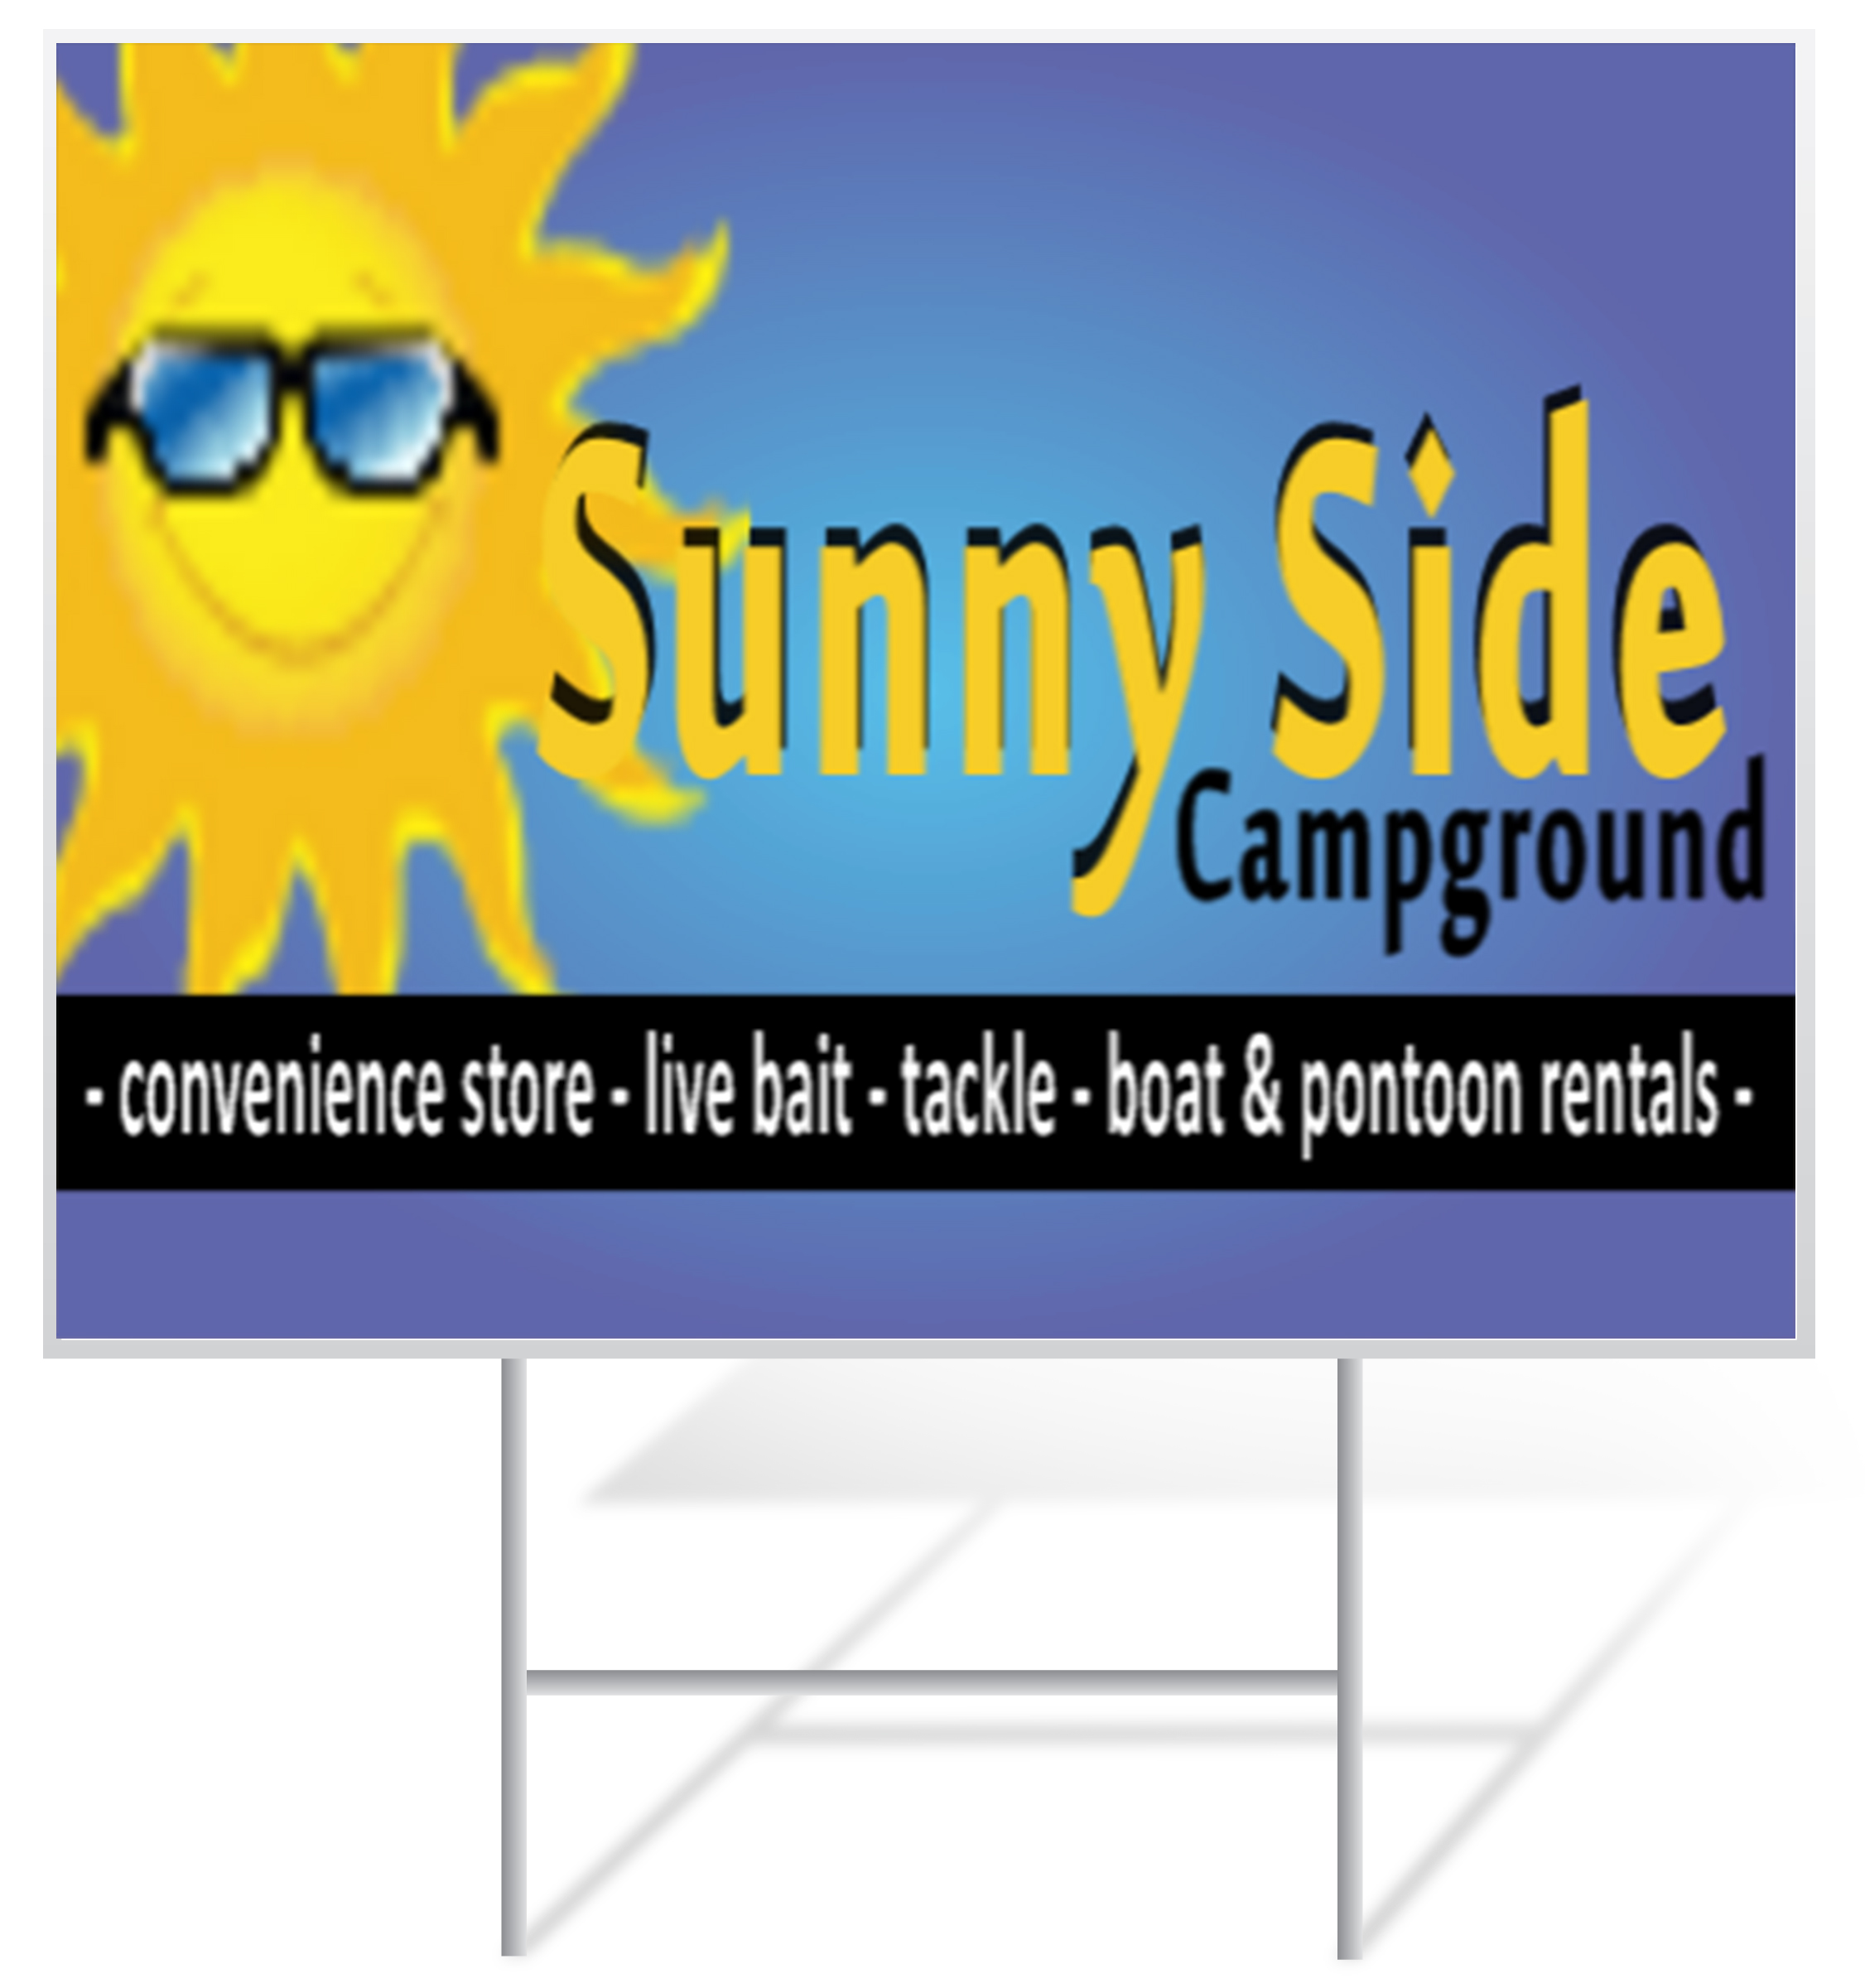 Resort Lawn Sign Example | LawnSigns.com